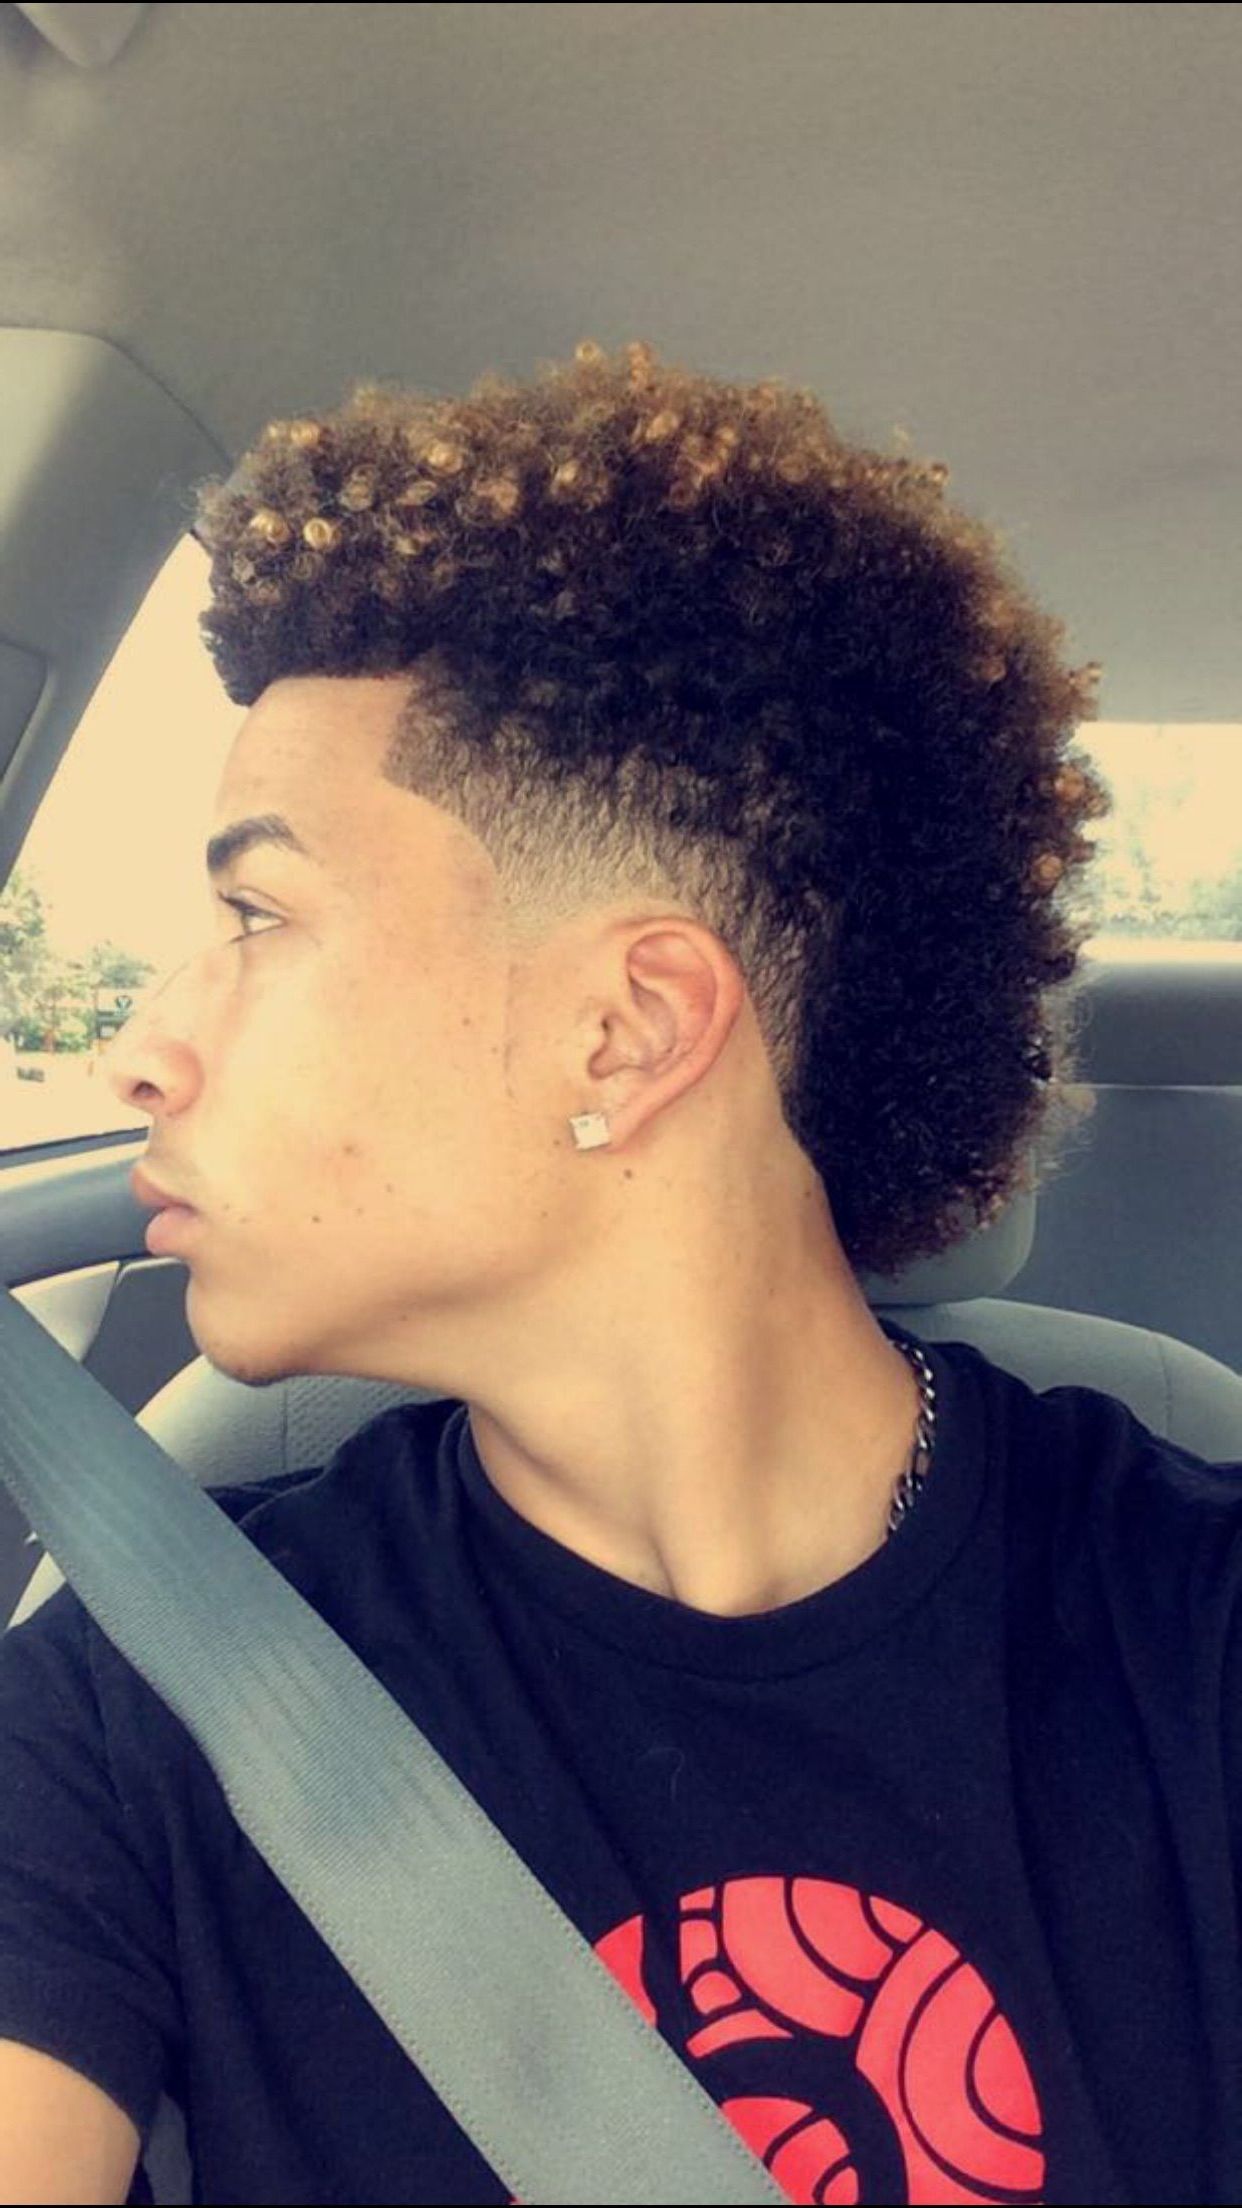 Hairstyles : Long Curly Mohawk Hairstyle Impressively Inside 2020 Curly Mohawk Haircuts (View 15 of 20)